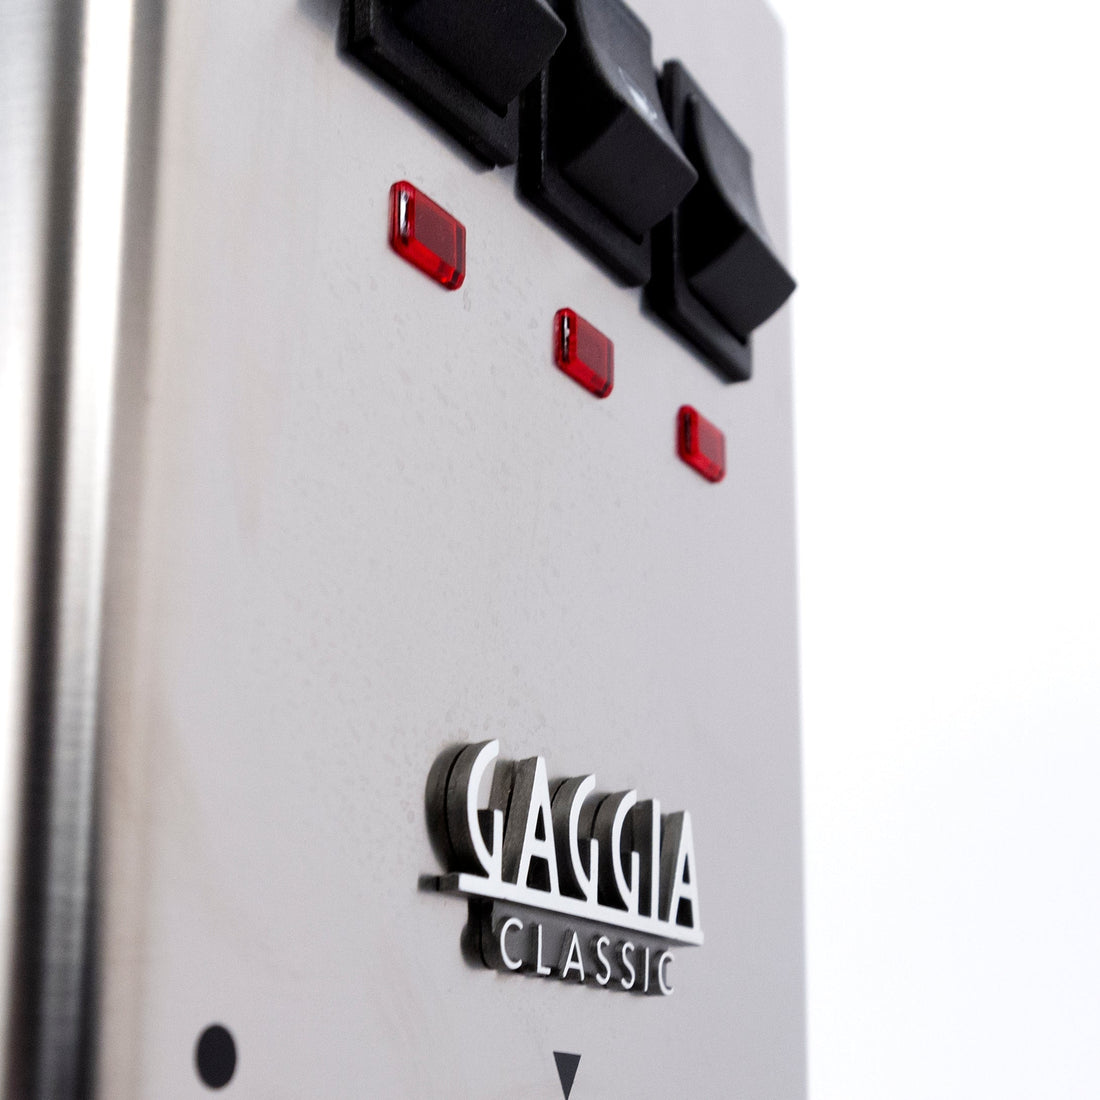 Gaggia Classic Pro in Stainless Steel - Zebra Wood